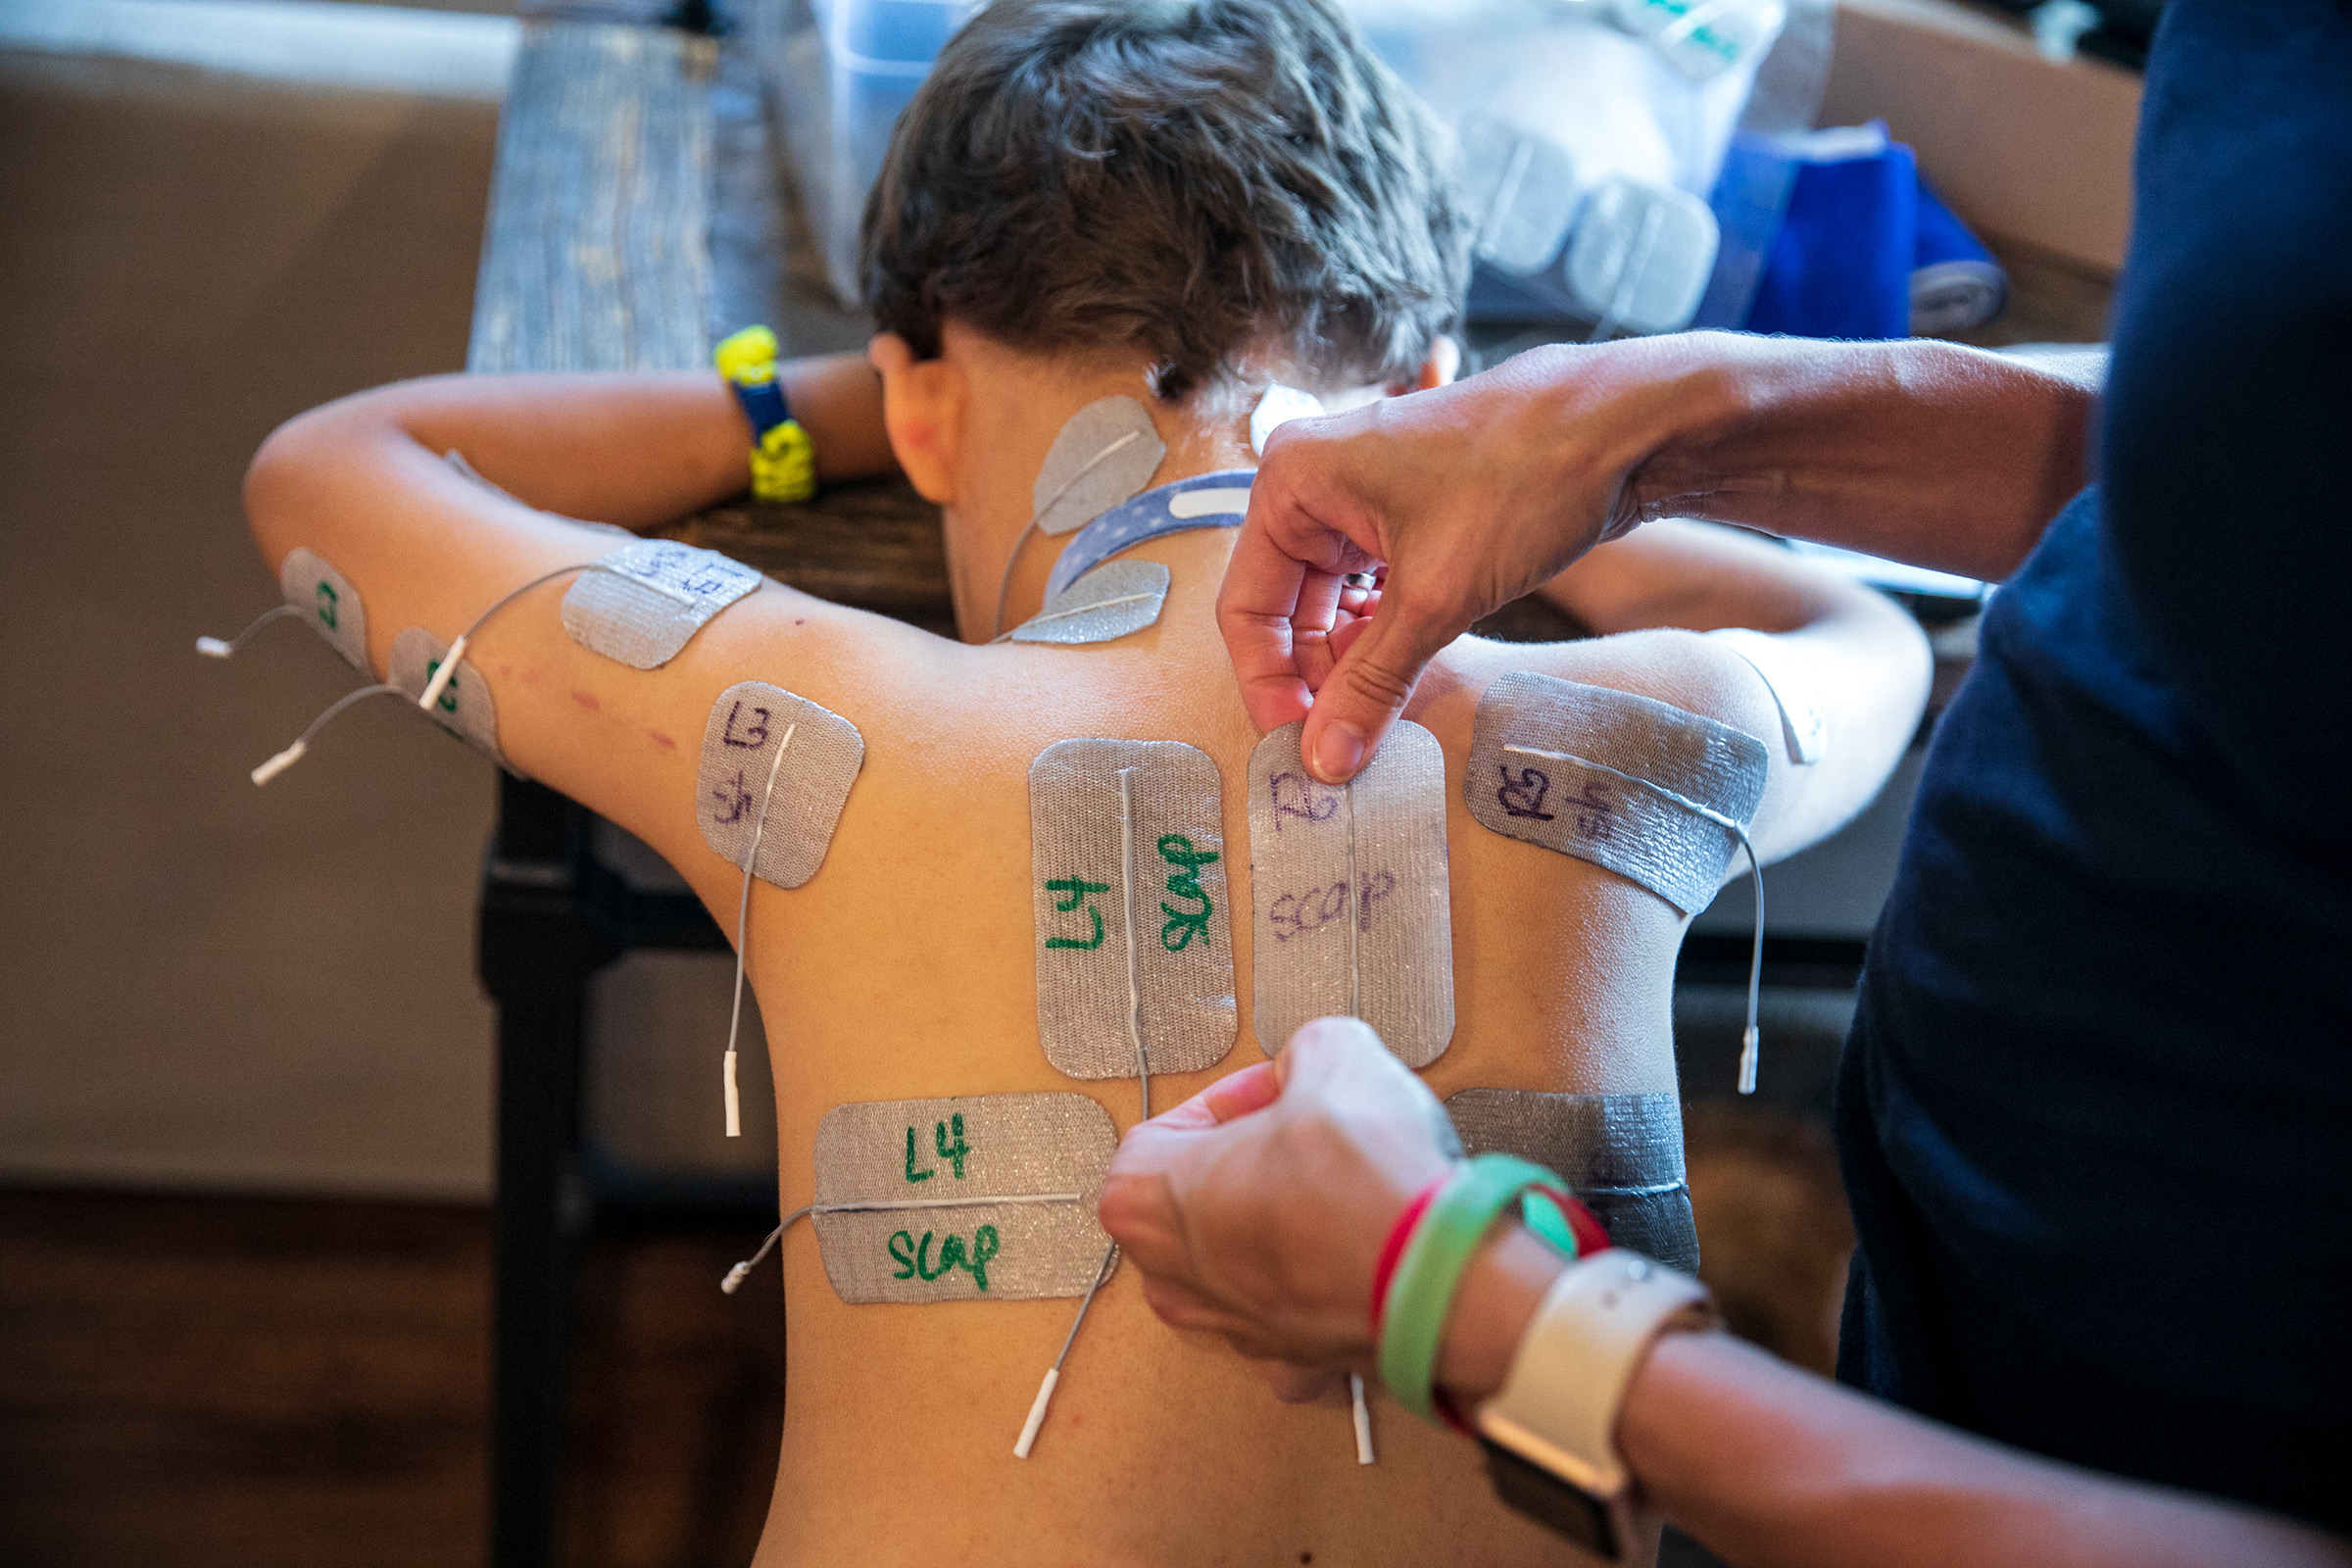 Muscle-stimulating pads are placed on Braden's back for treatment.